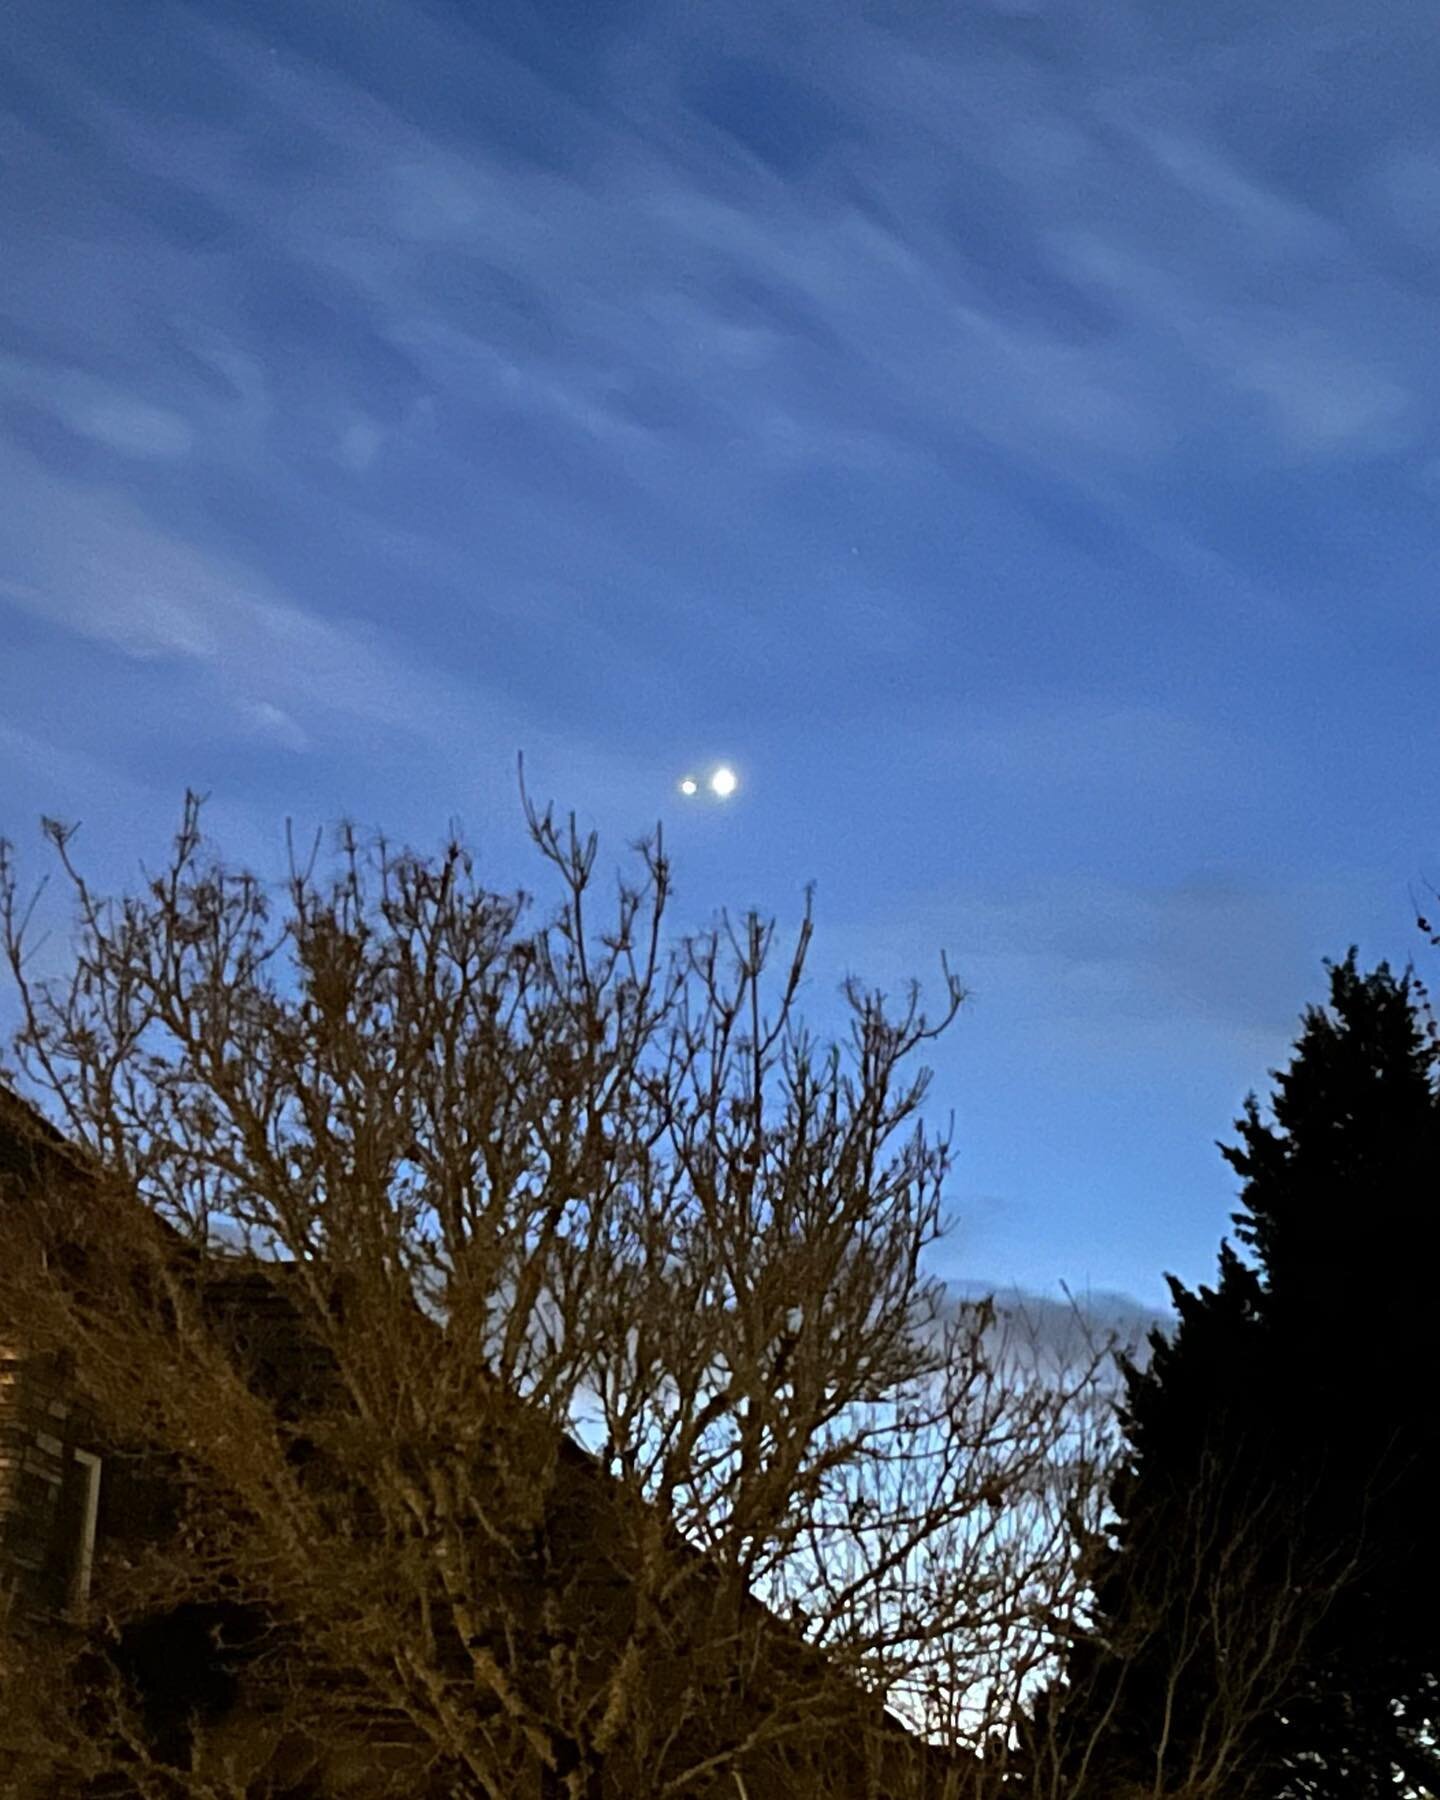 Driving home this evening, a strange phenomenon in the sky caught my attention. Is it a plane? No. Is it a UFO? No. It is Venus and Jupiter passing each other on a conjunction. Super cool! Step outside and check it out.